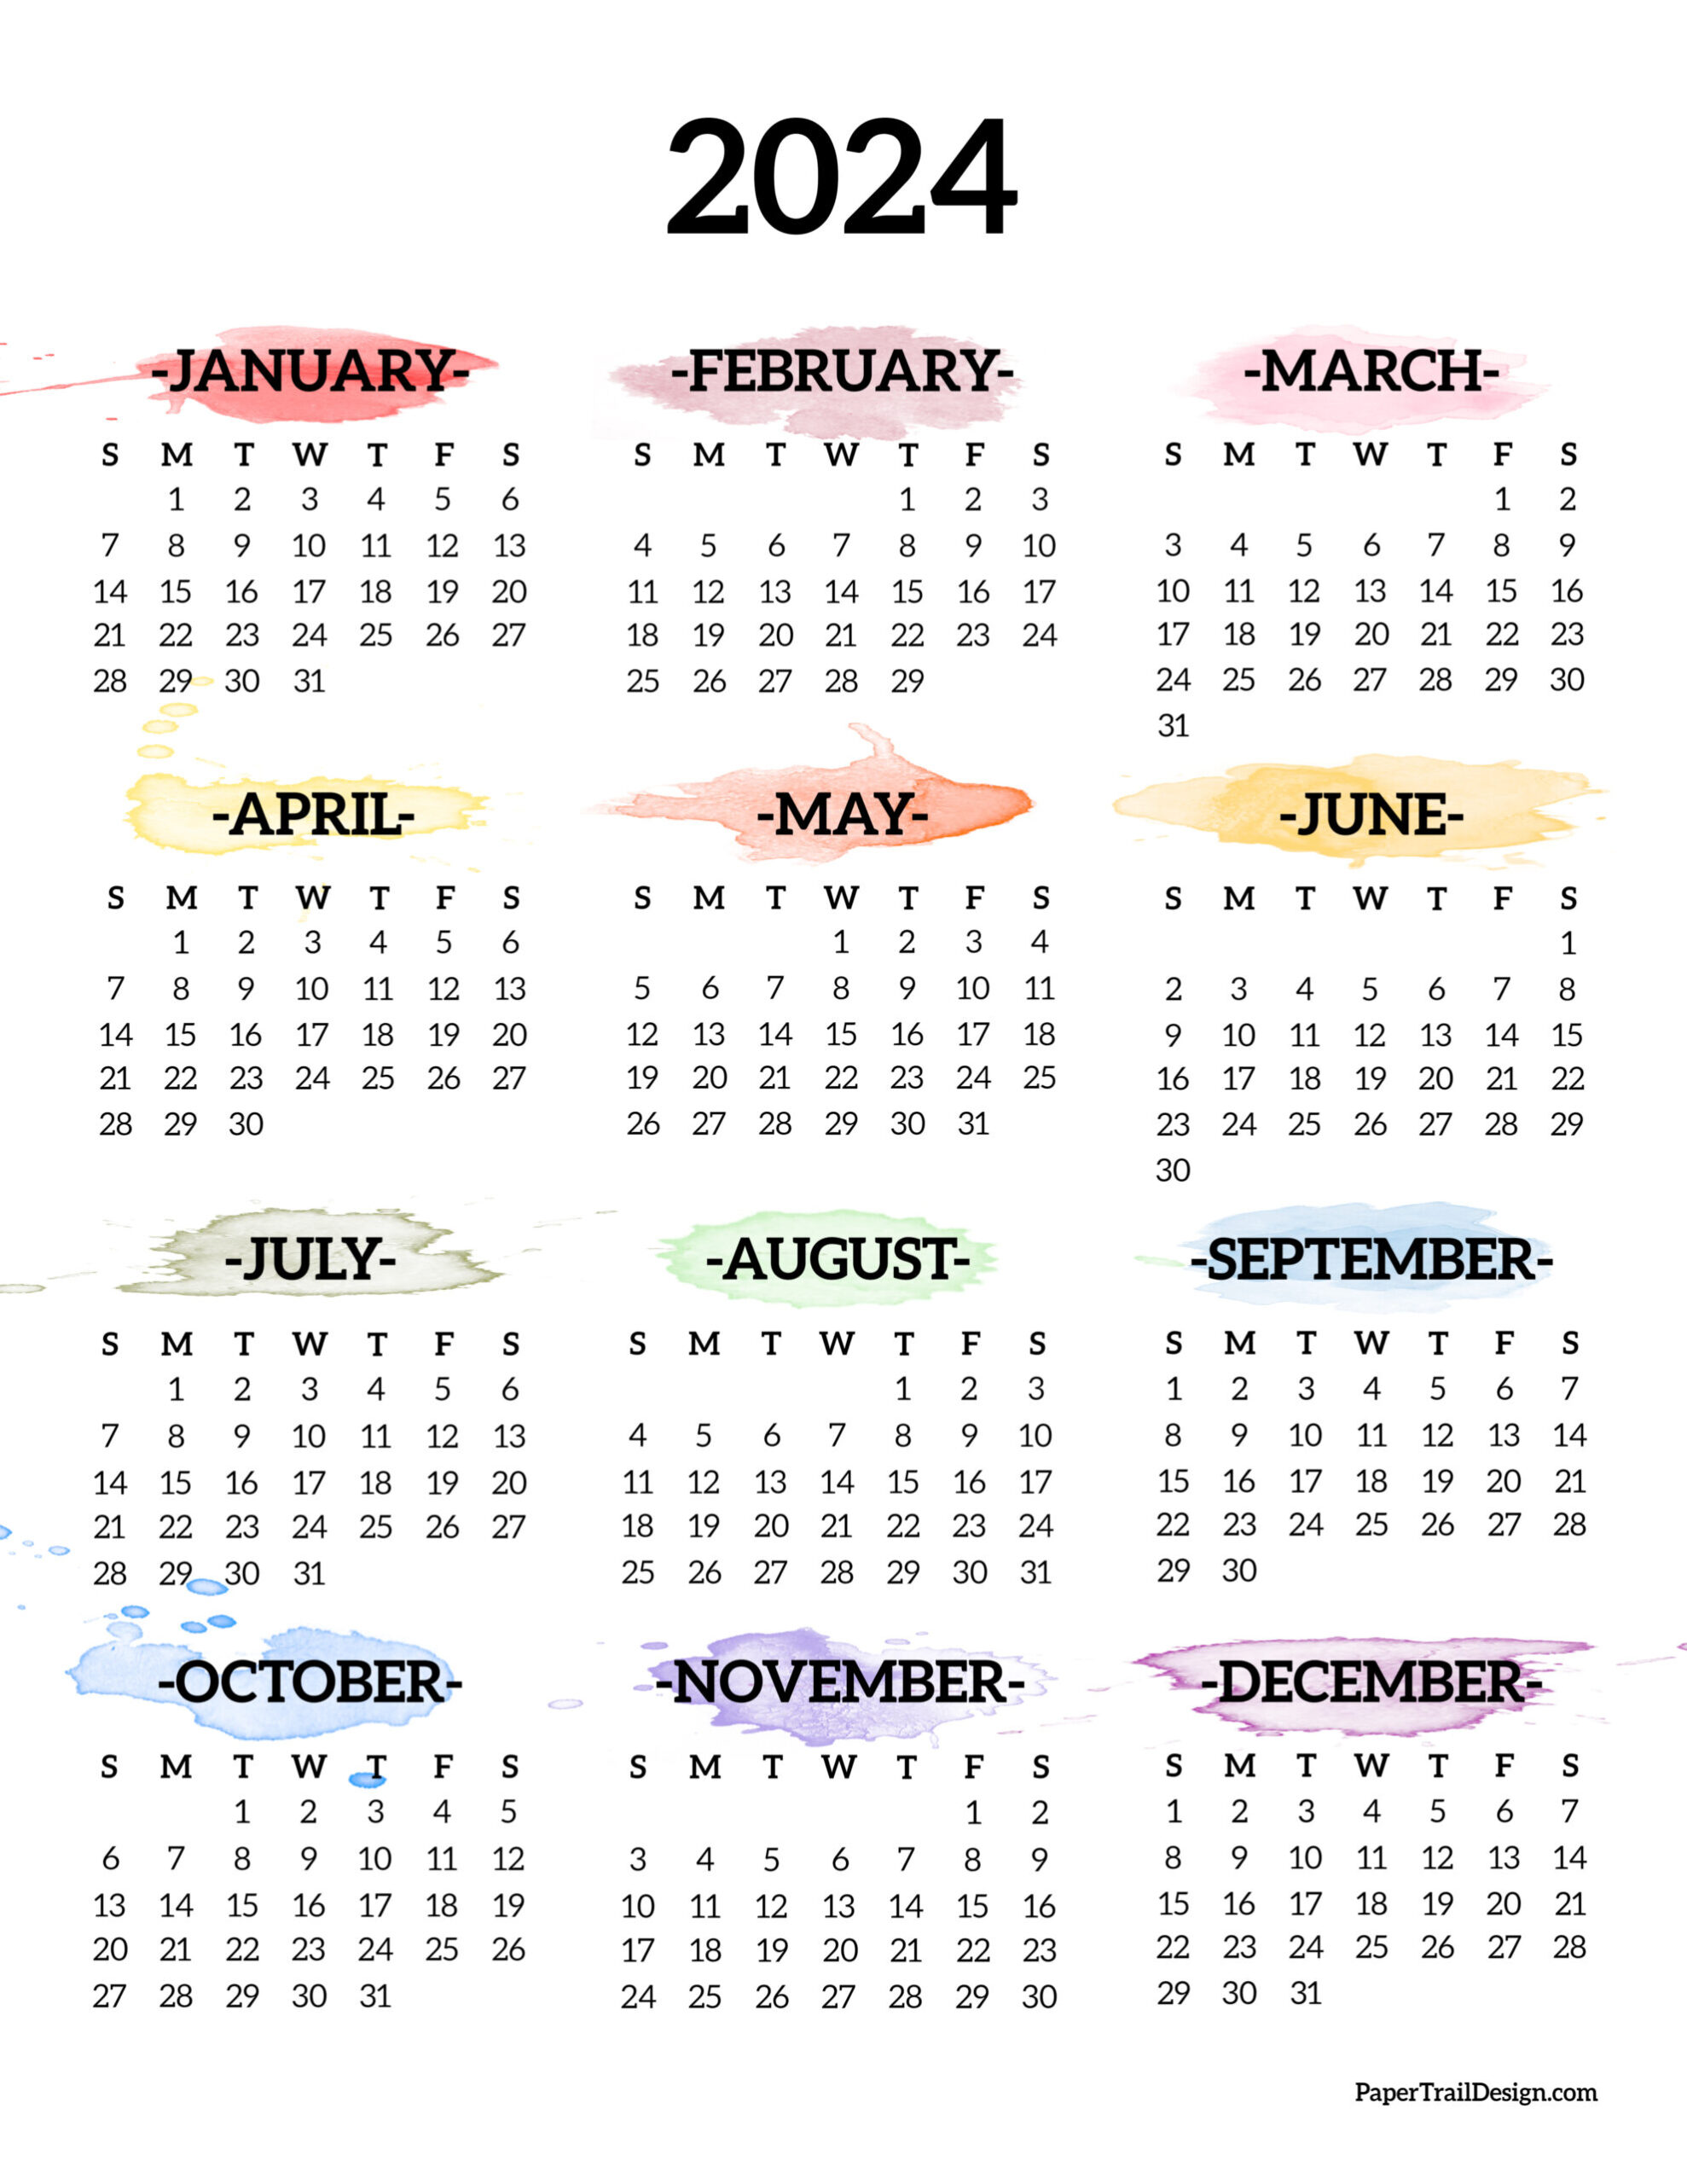 Calendar 2024 Printable One Page - Paper Trail Design for Best Free Printable Calendar 2024